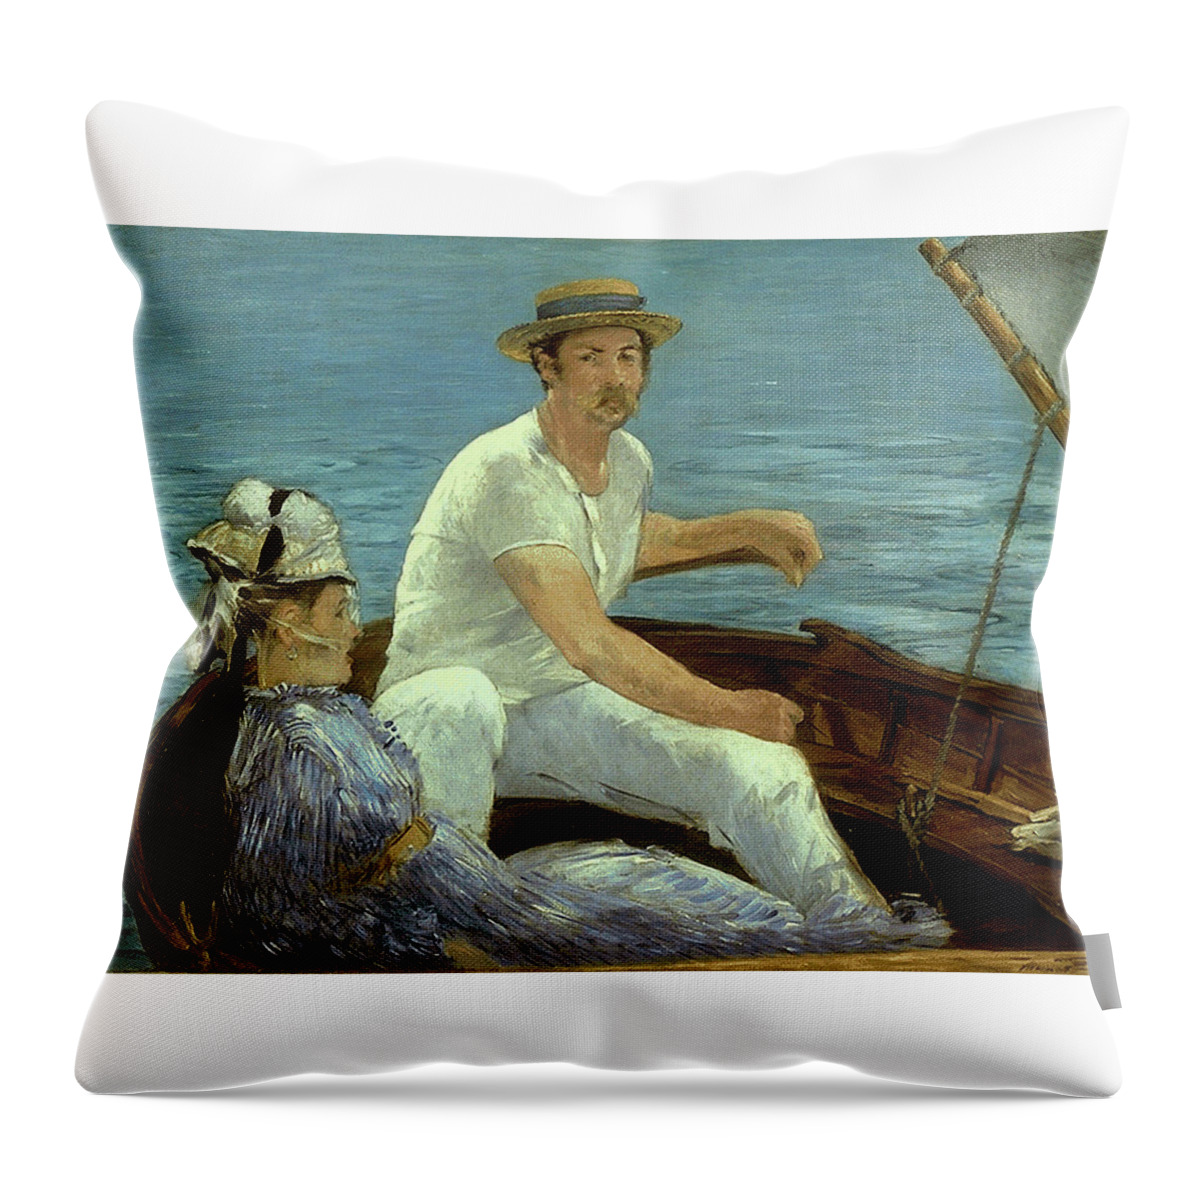 Boating Throw Pillow featuring the painting Boating #1 by MotionAge Designs